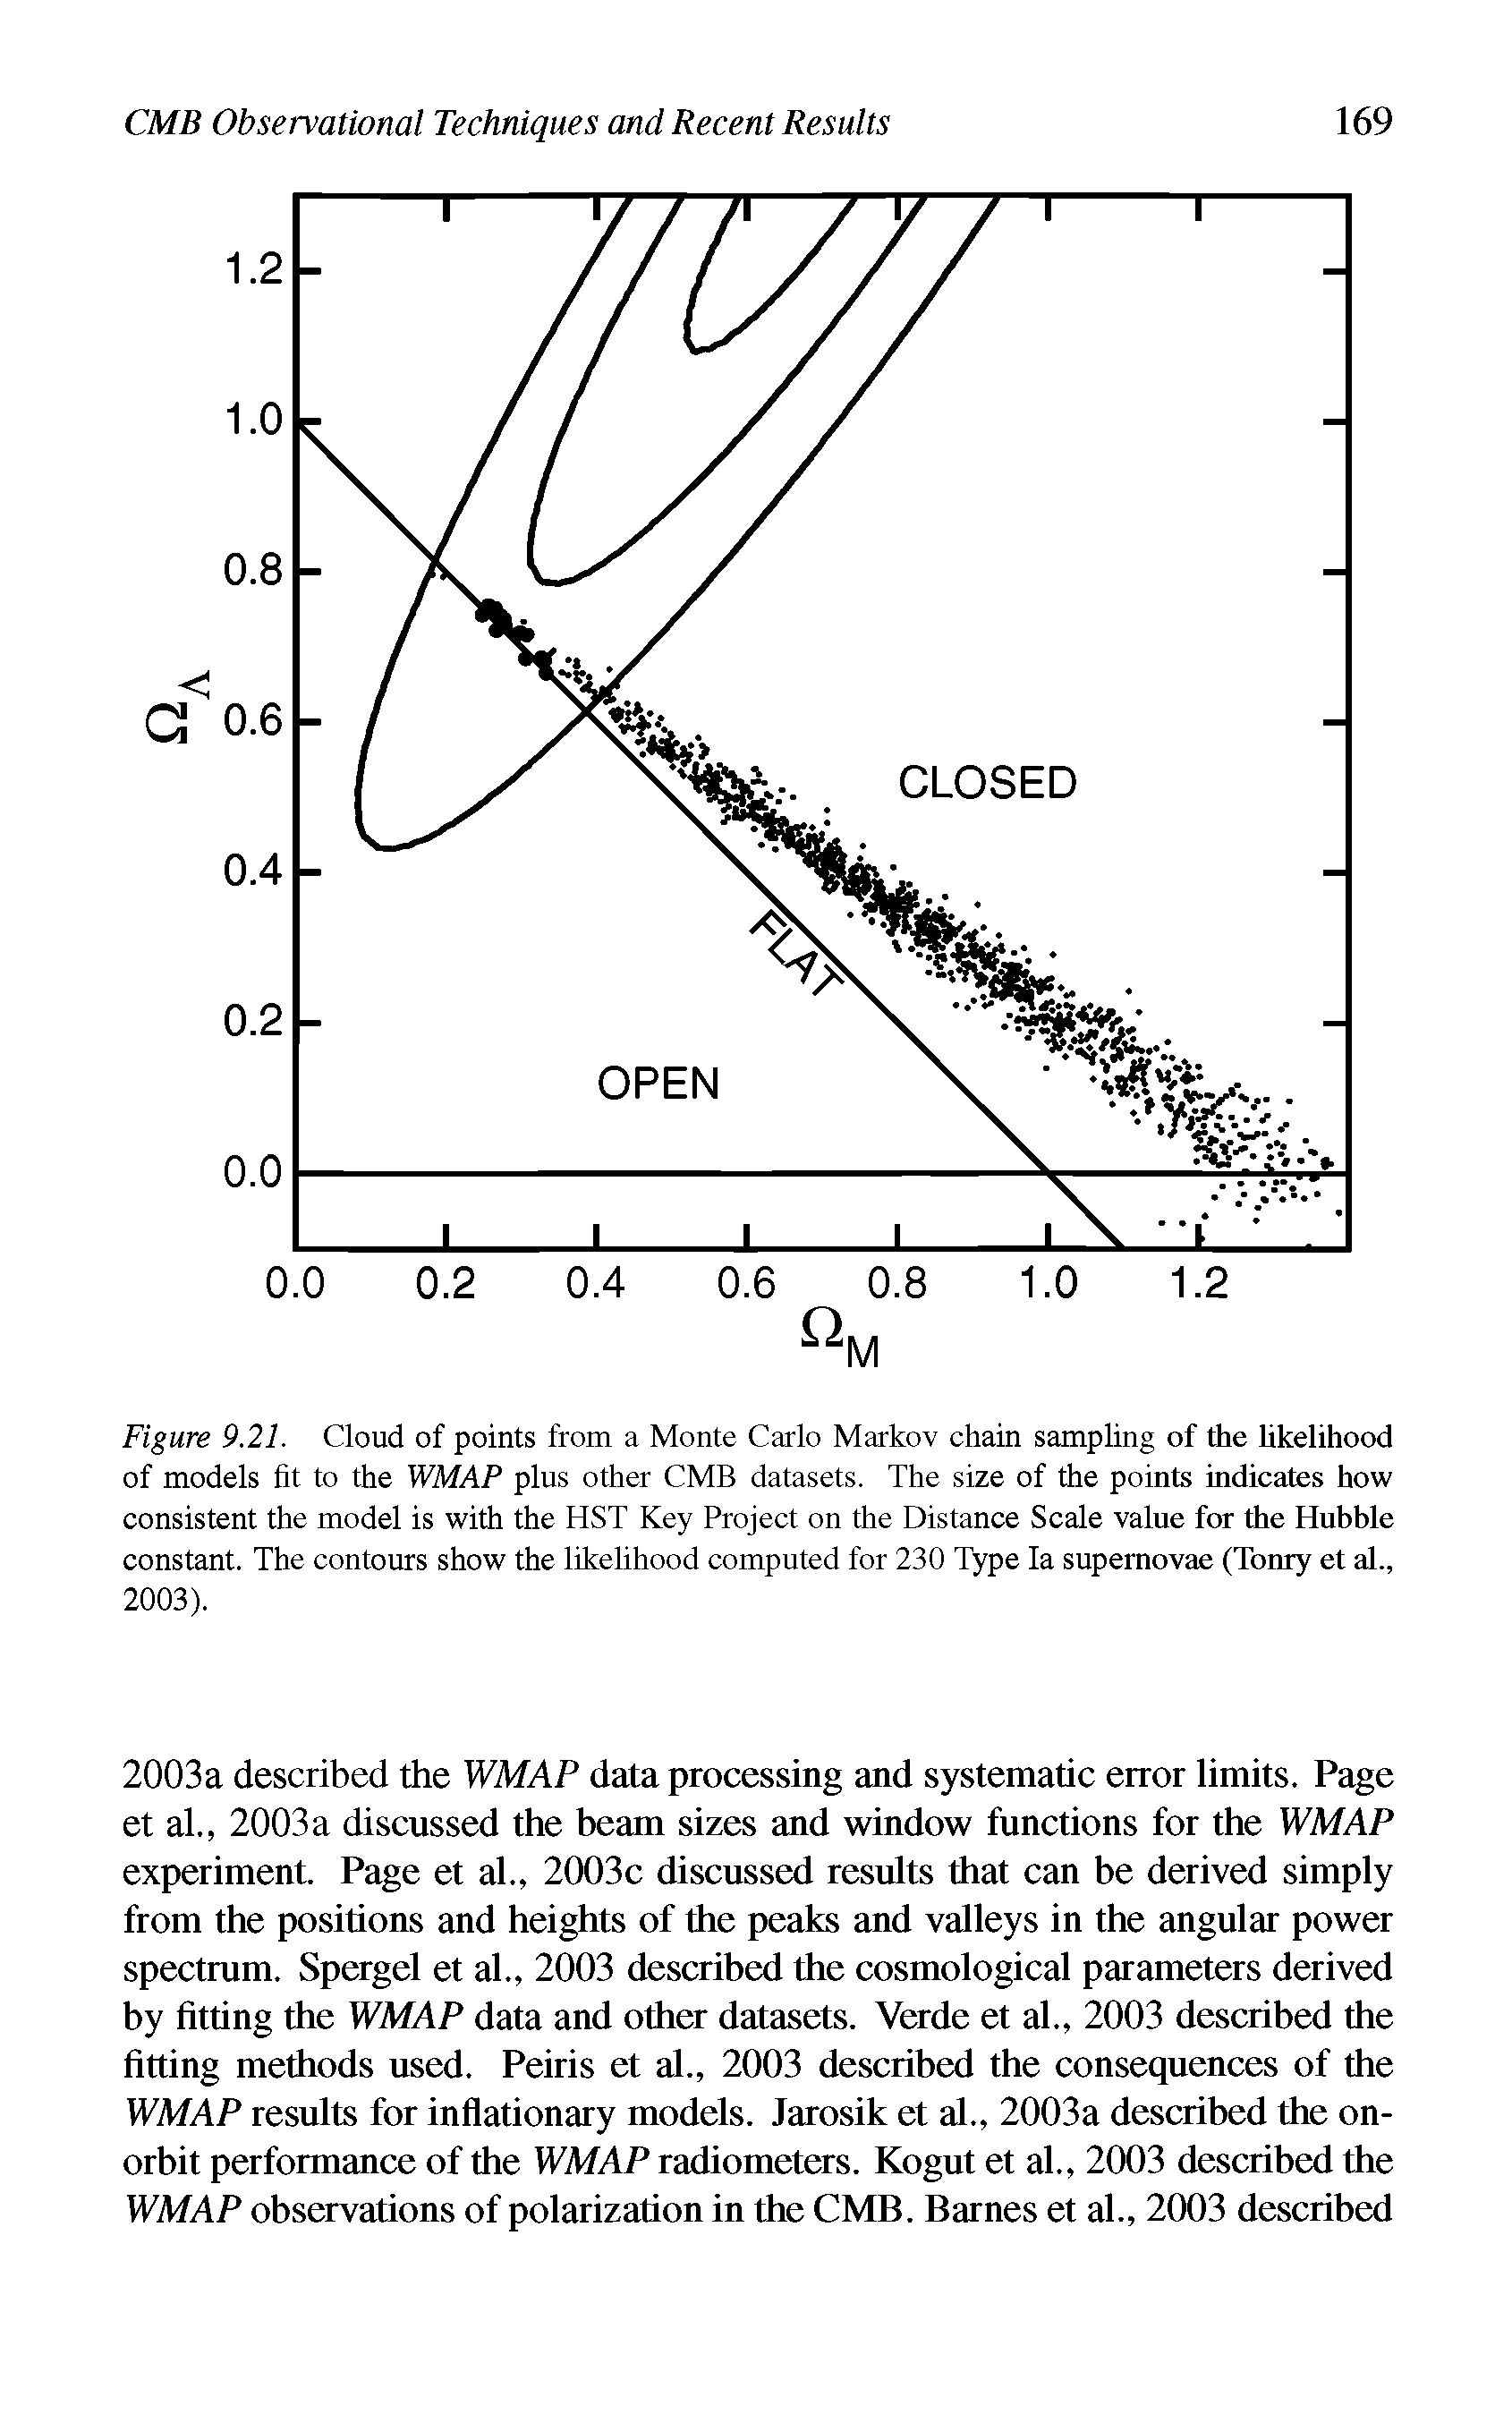 Figure 9.21. Cloud of points from a Monte Carlo Markov chain sampling of the likelihood of models fit to the WMAP plus other CMB datasets. The size of the points indicates how consistent the model is with the HST Key Project on the Distance Scale value for the Hubble constant. The contours show the likelihood computed for 230 Type la supernovae (Tonry et al., 2003).